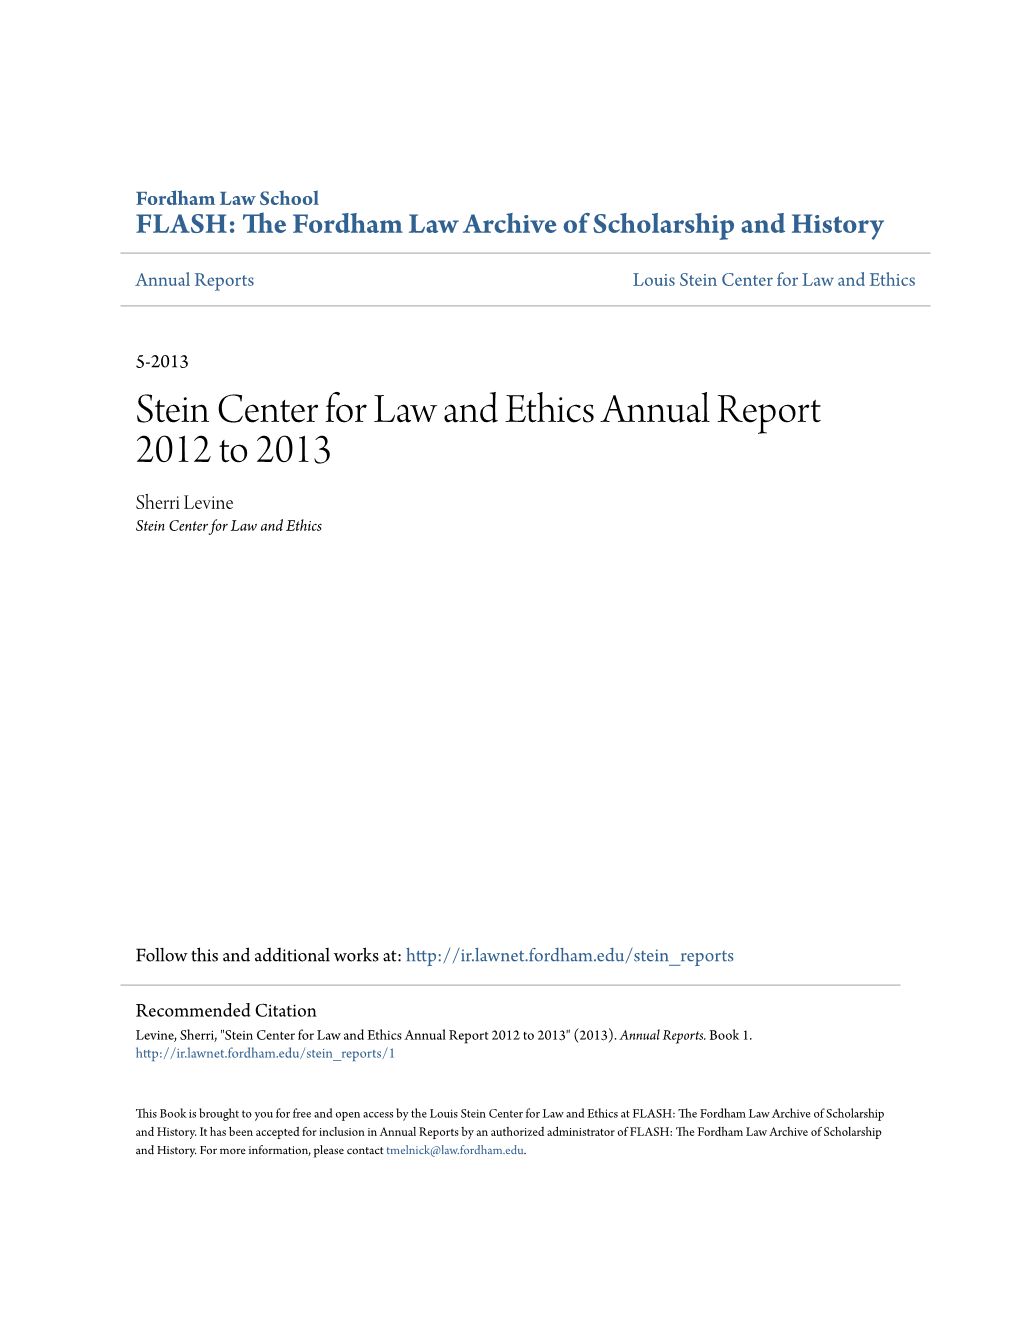 Stein Center for Law and Ethics Annual Report 2012 to 2013 Sherri Levine Stein Center for Law and Ethics